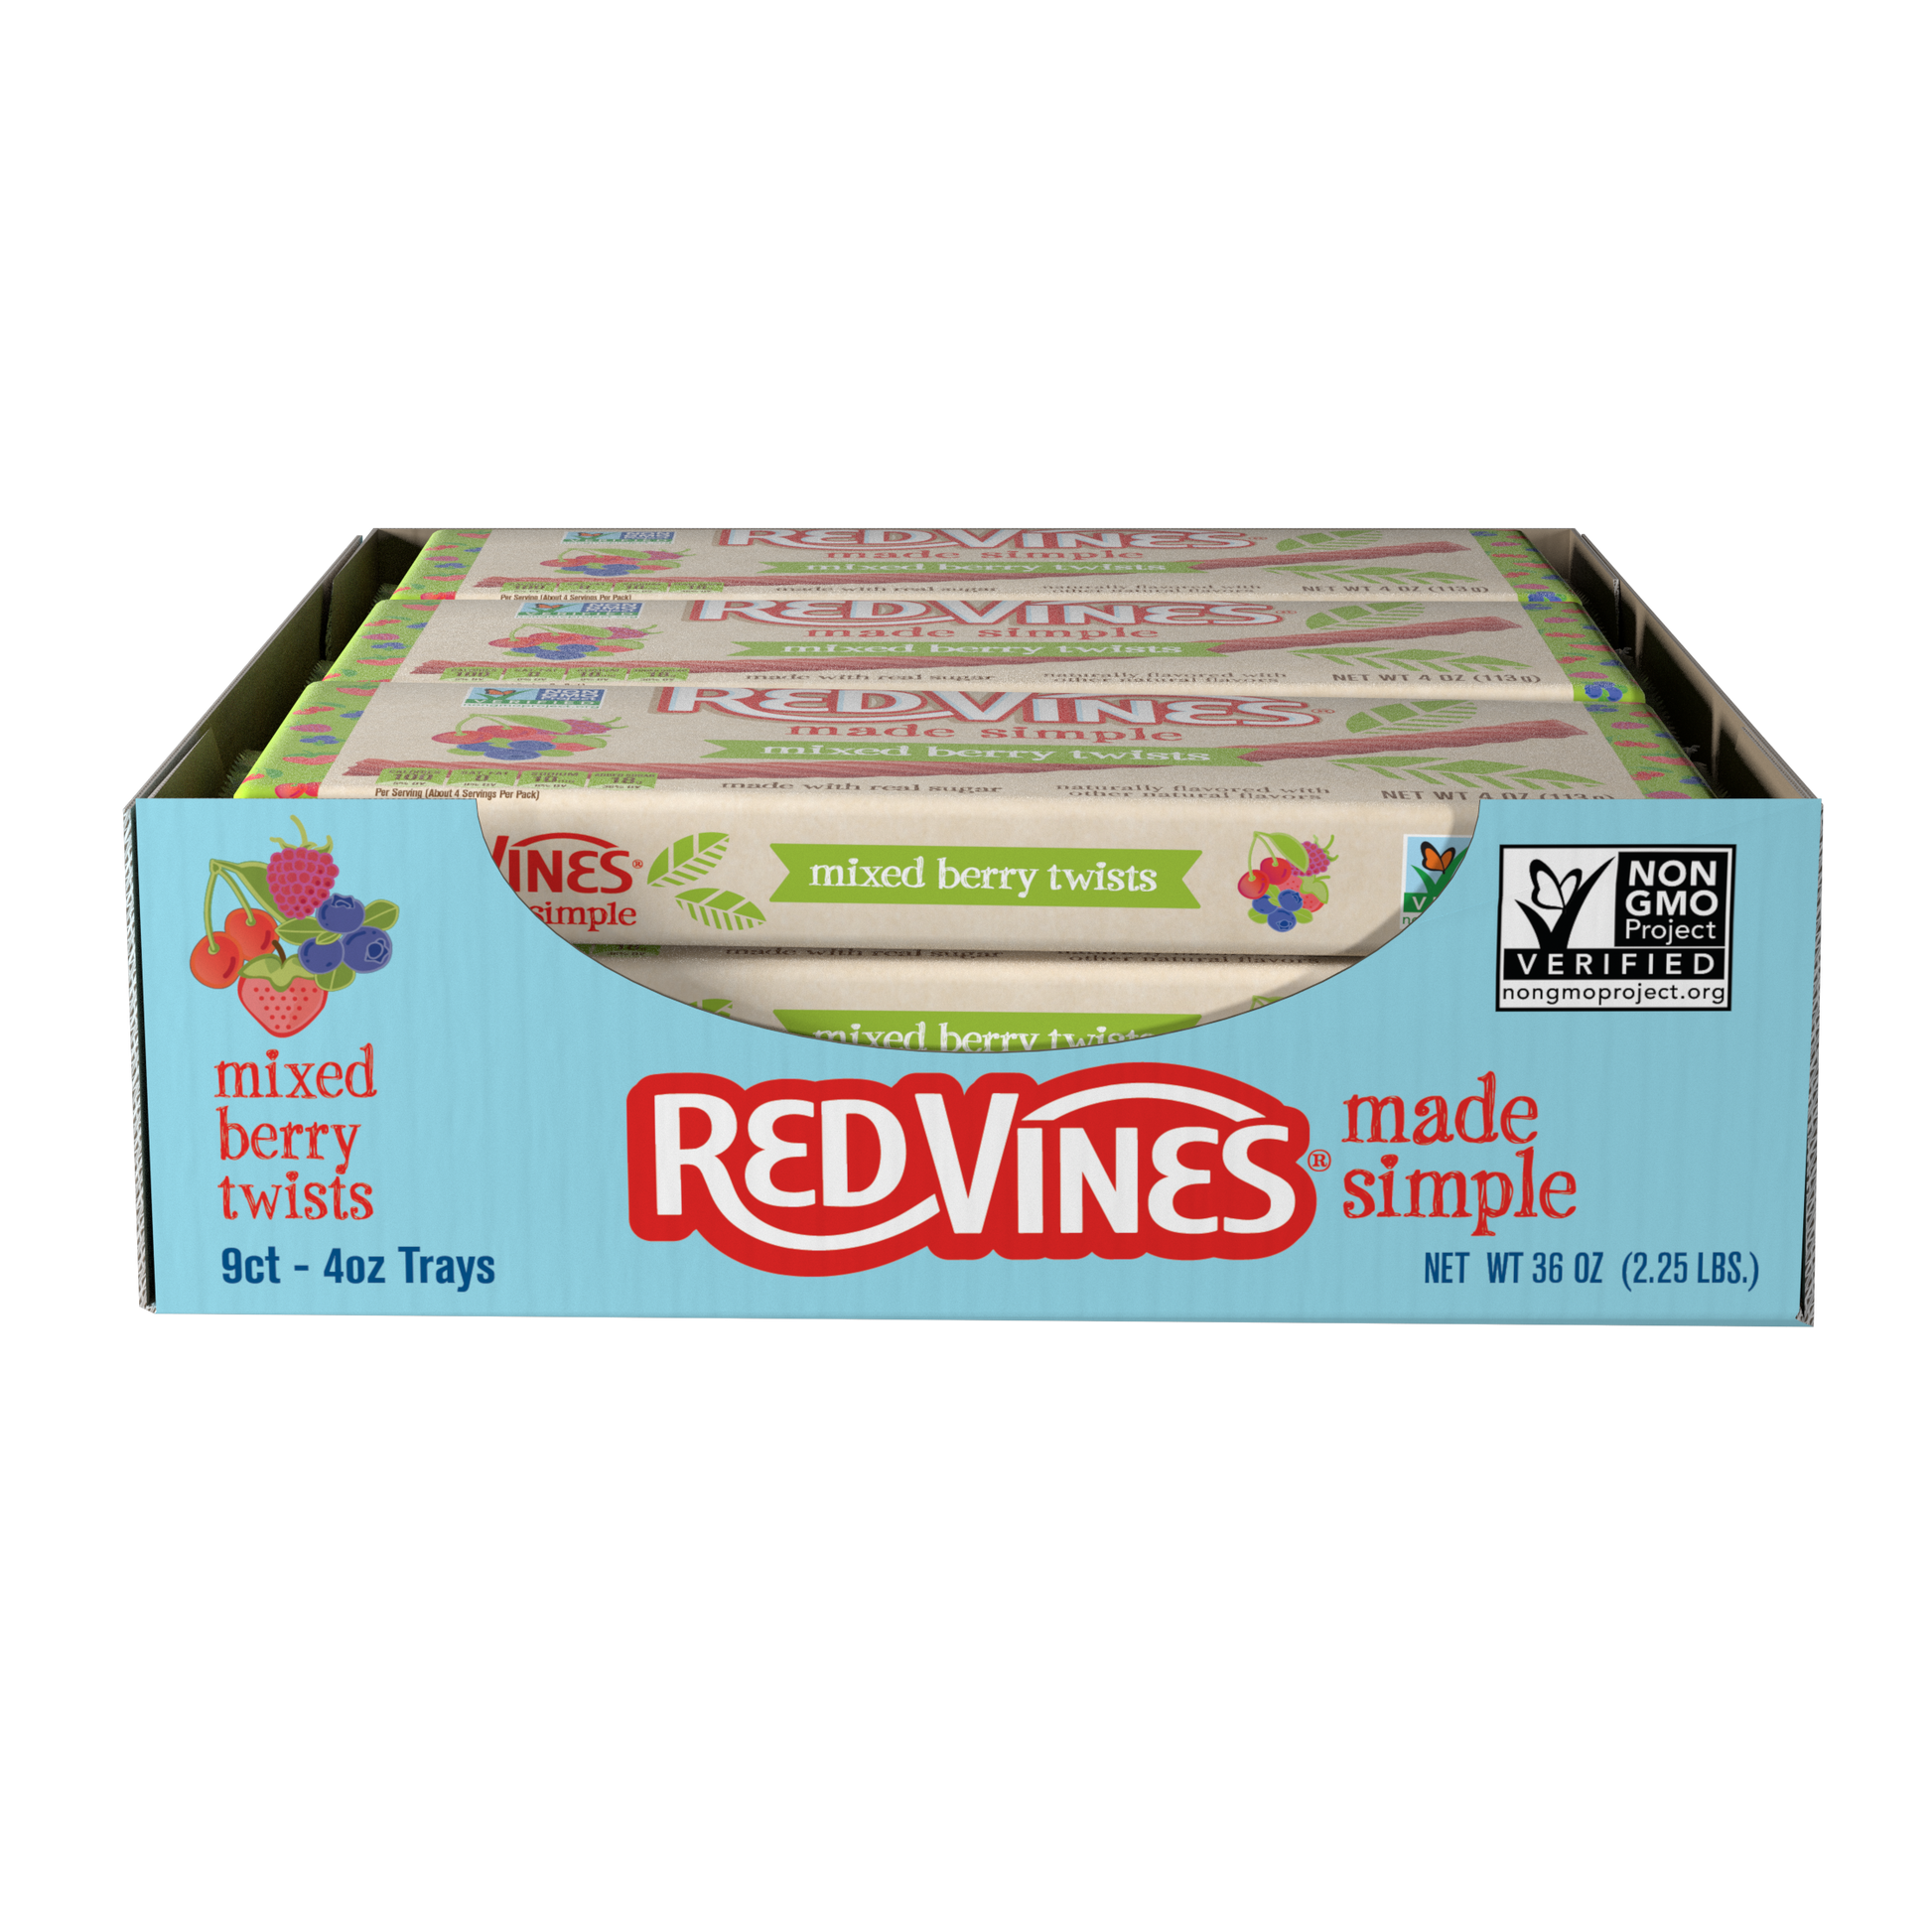 Display caddy of 9 RED VINES Made Simple Berry Licorice Twists, 4oz Trays